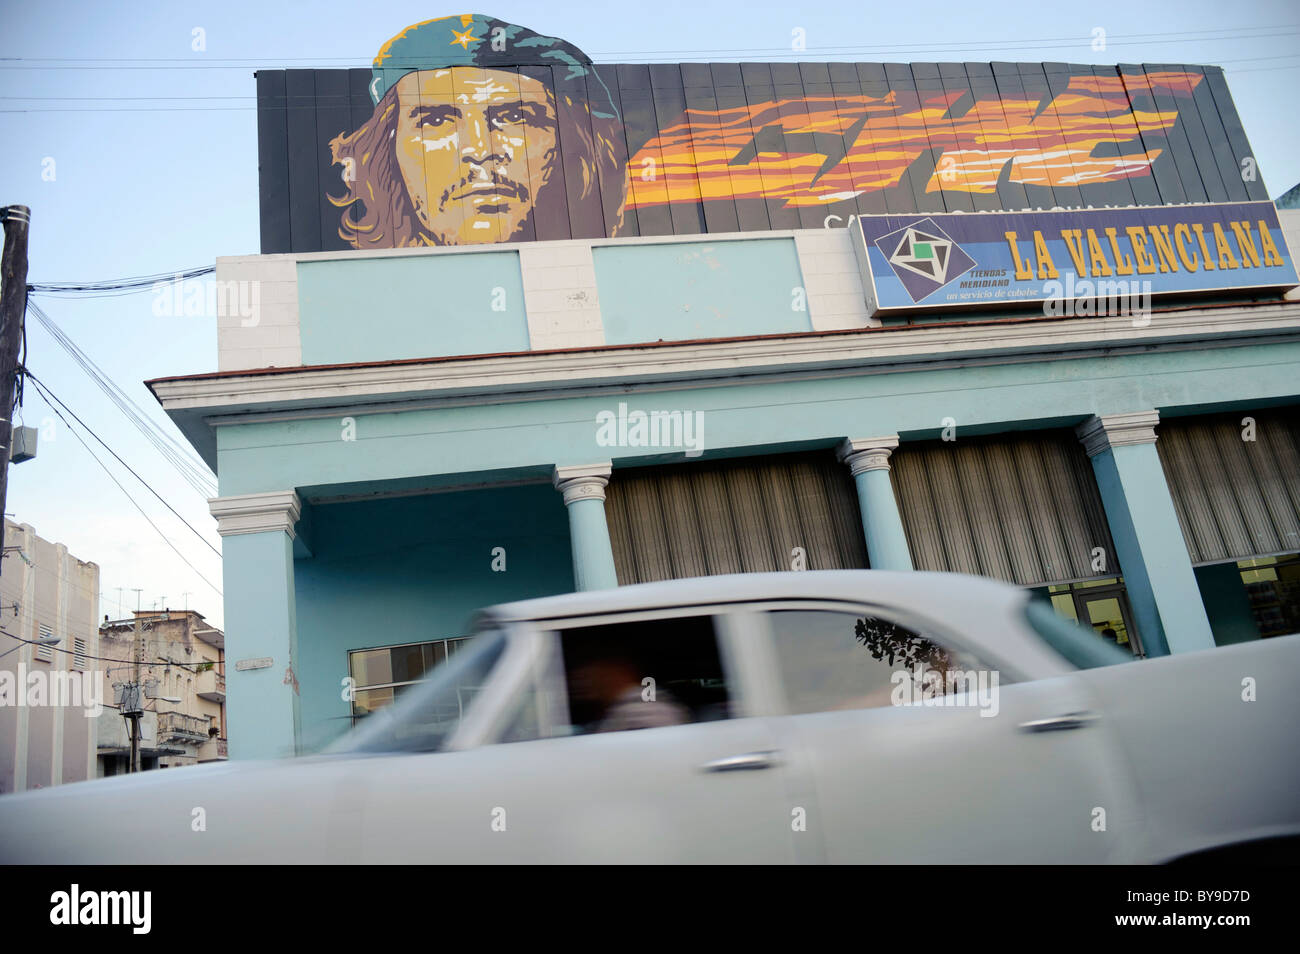 Old Classic american car passing with a Poster of Che Guevara on a Building, in a street of Cienfuegos, cuba. Stock Photo